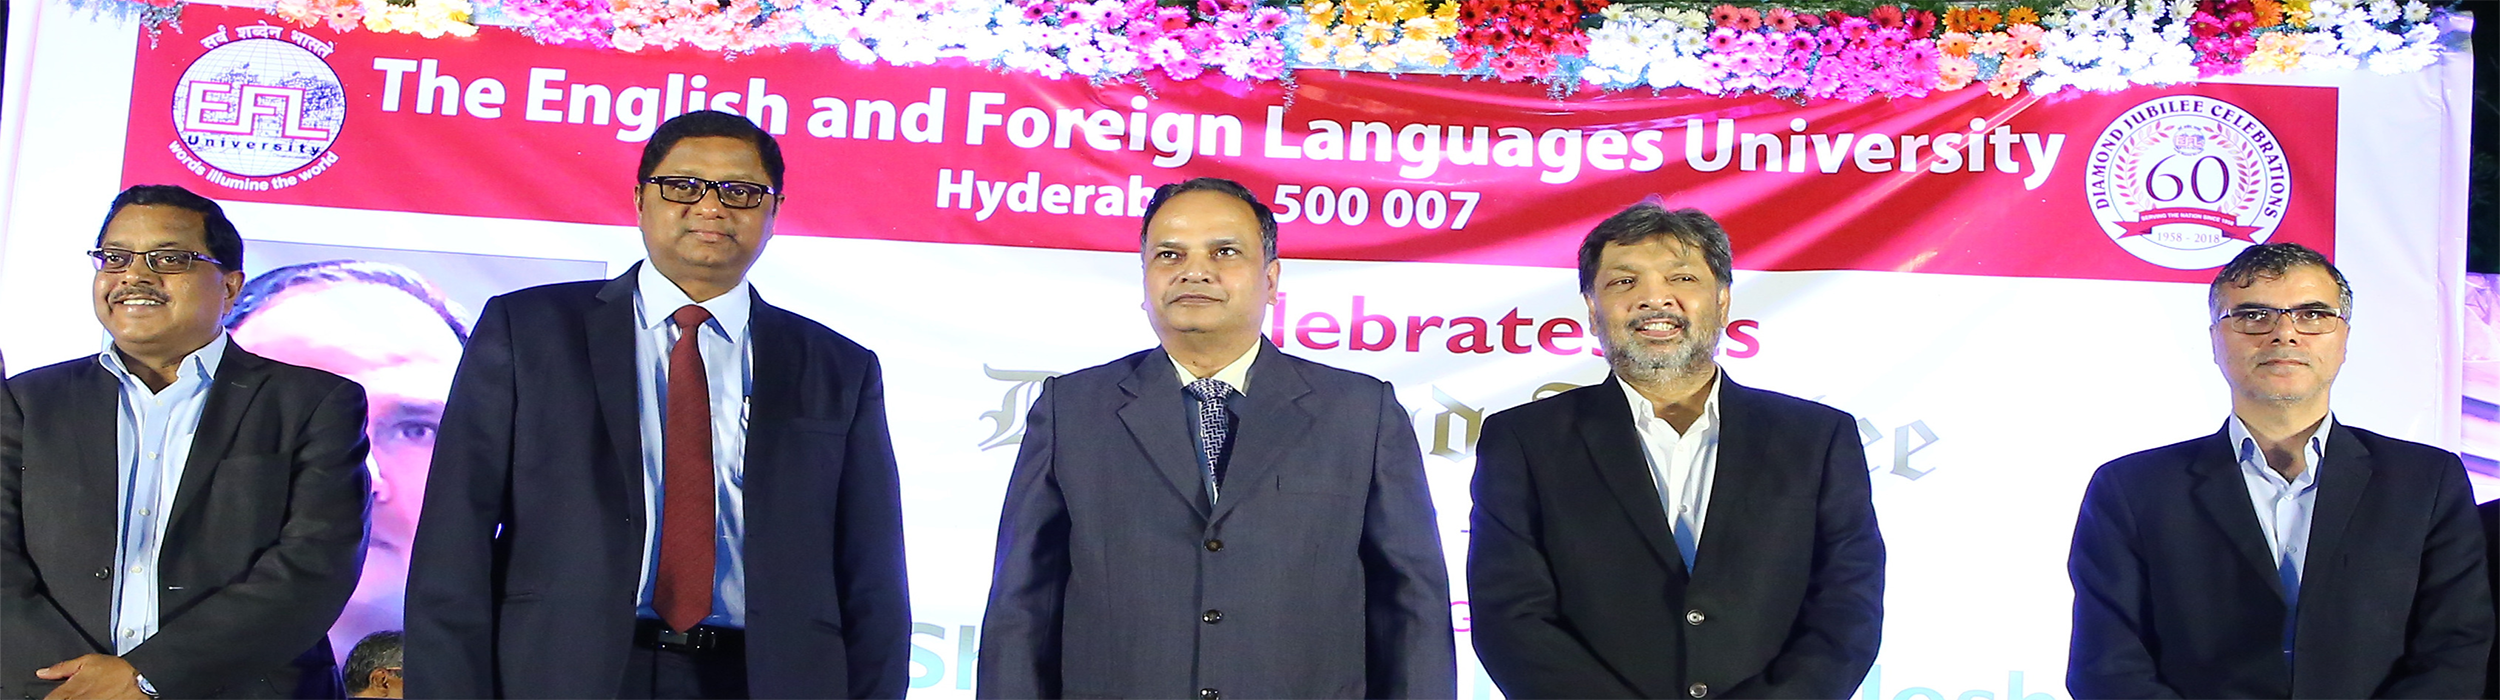 English and Foreign Languages University recruiting 58 Faculty posts for Hyderabad, Lucknow and Shillong campuses